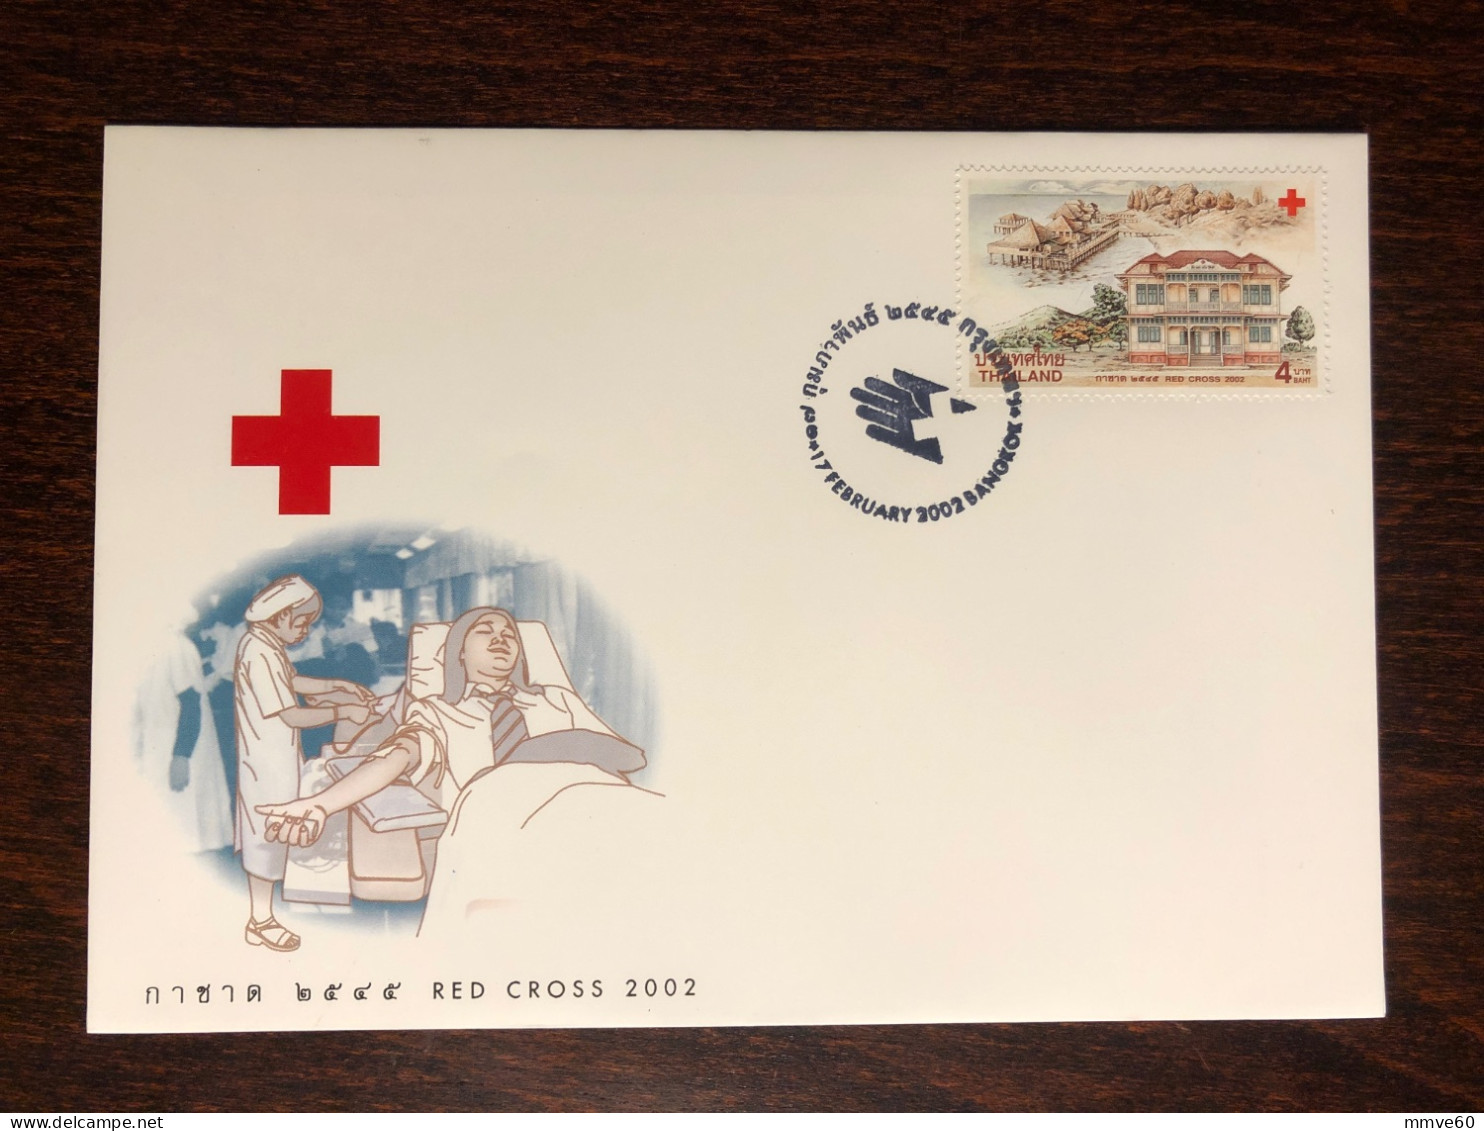 THAILAND FDC COVER 2002 YEAR RED CROSS HOSPITAL HEALTH MEDICINE STAMPS - Thaïlande